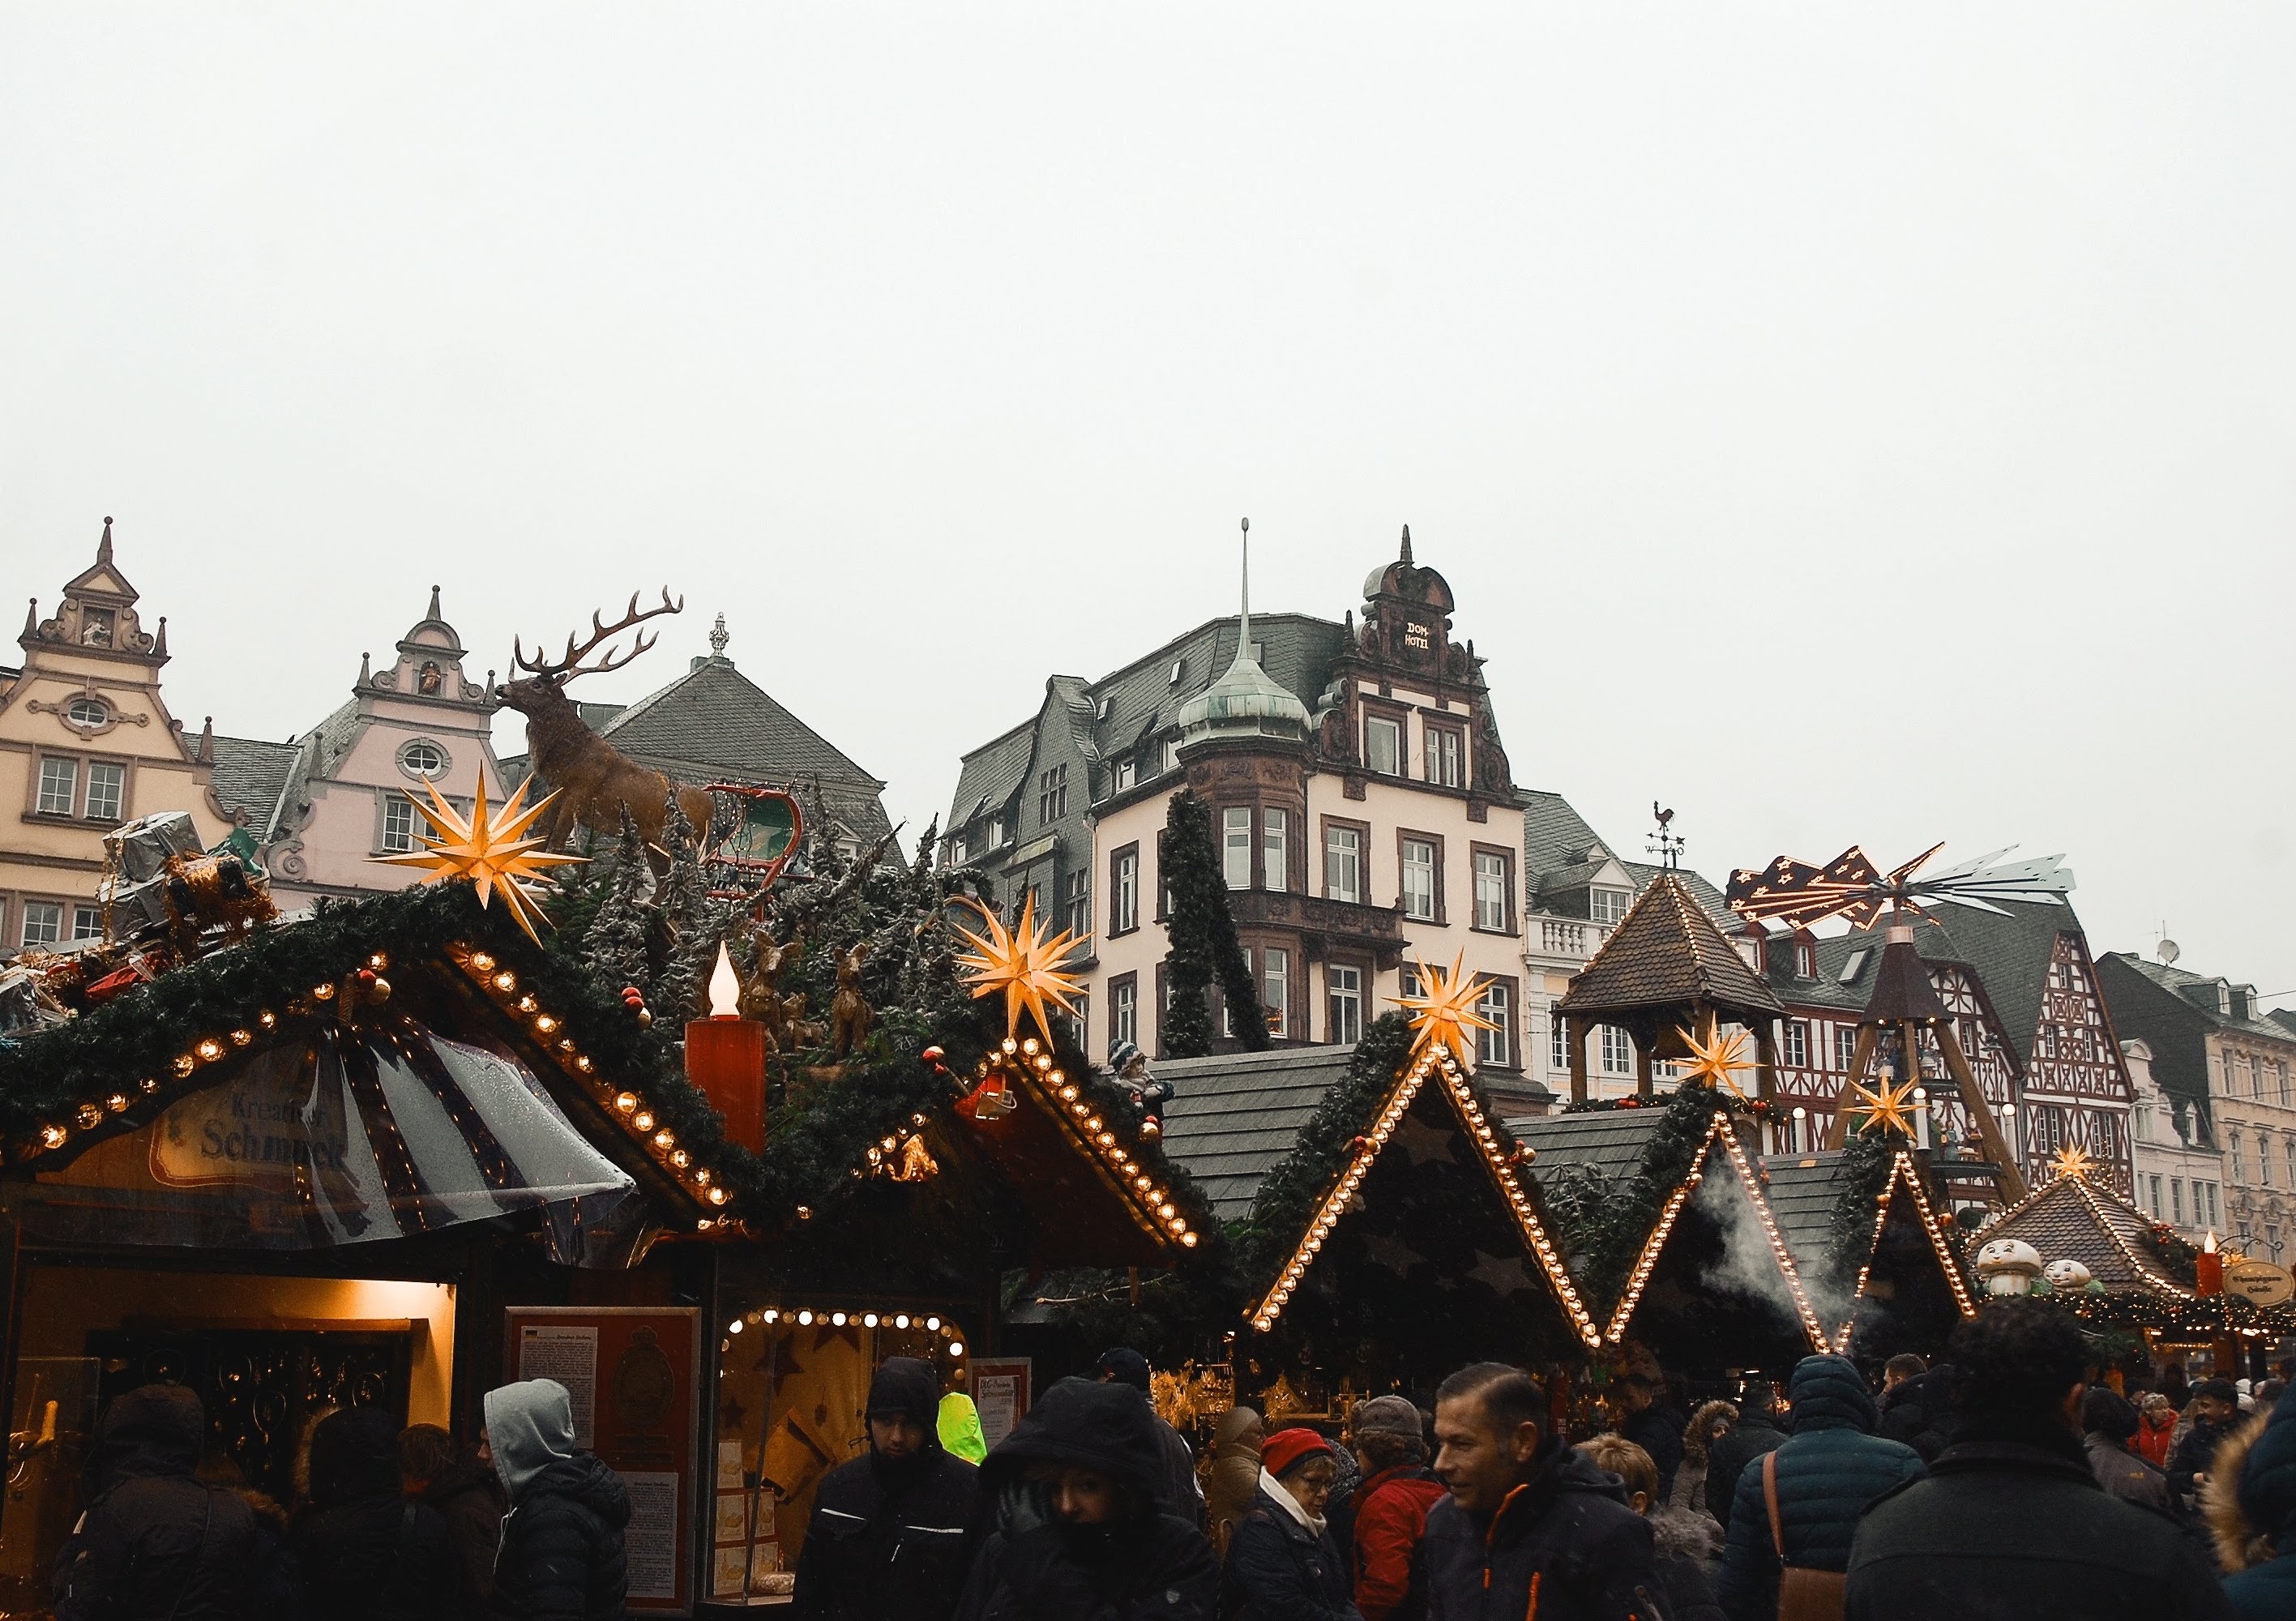 Image of Christmas market stalls in Trier, Germany